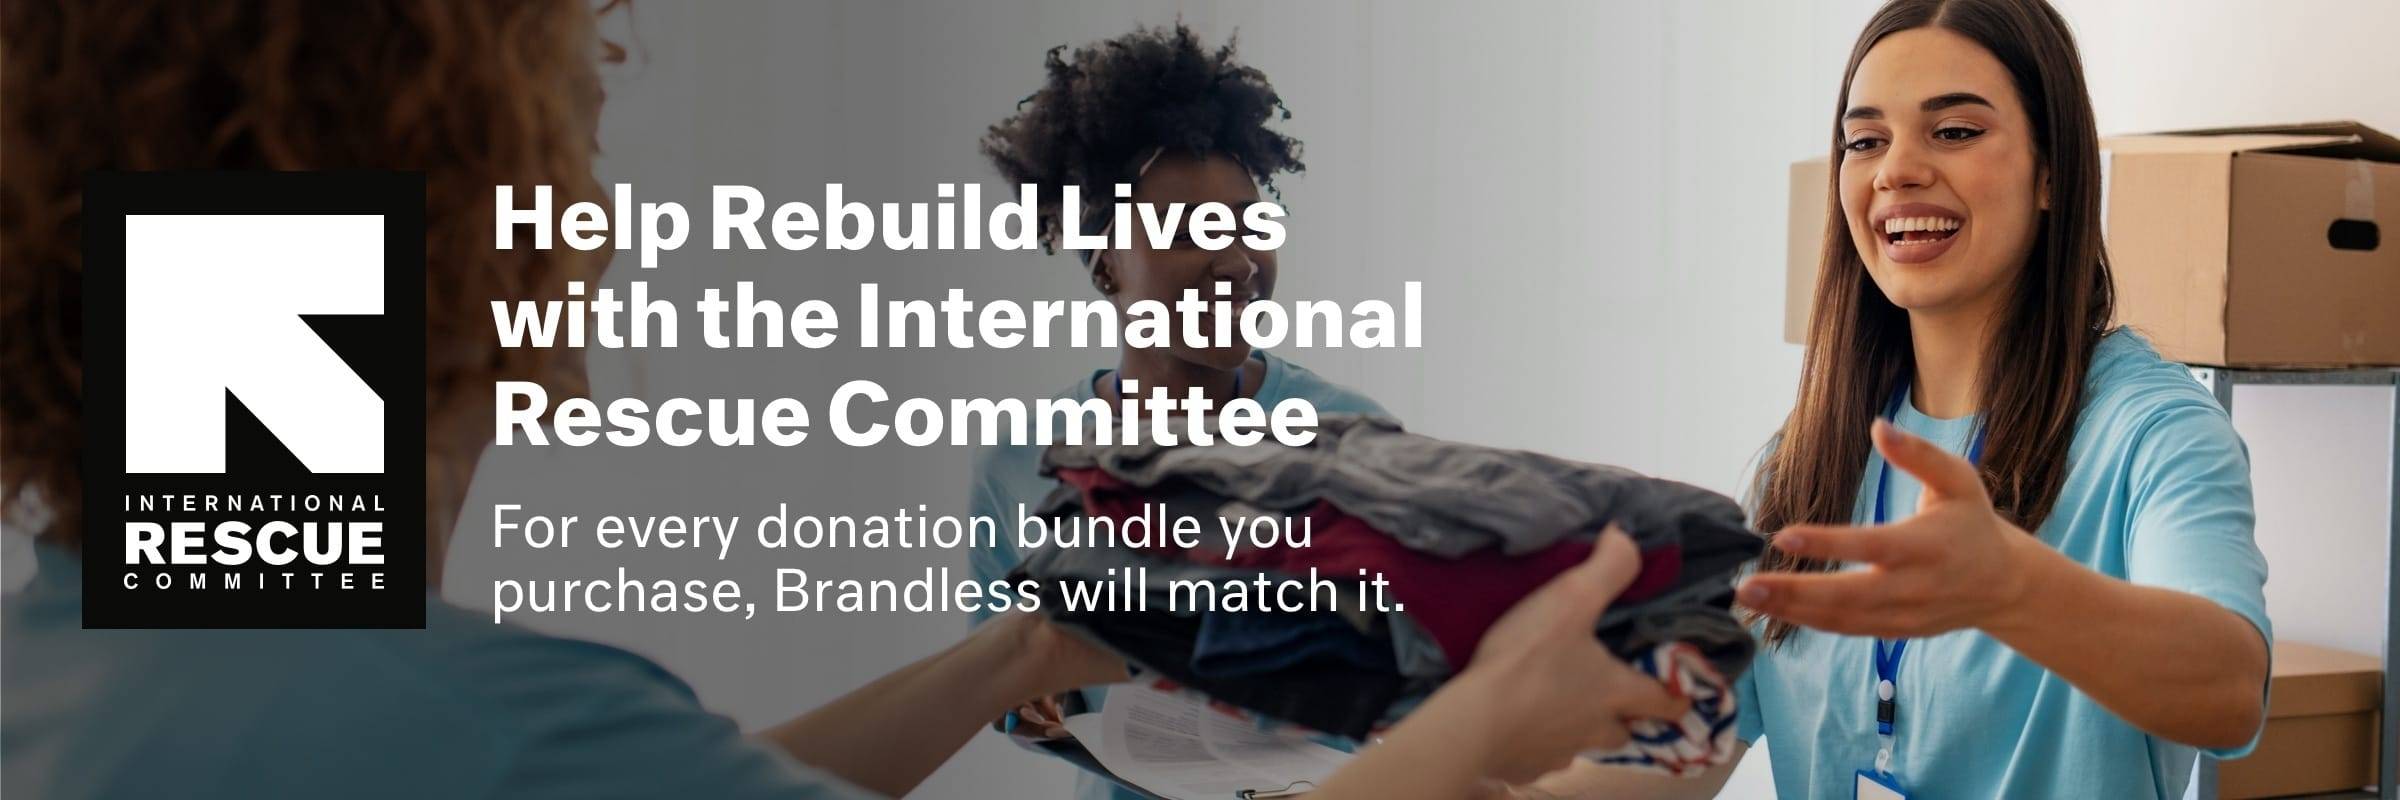 Help rebuild lives with the International Rescue Committee.